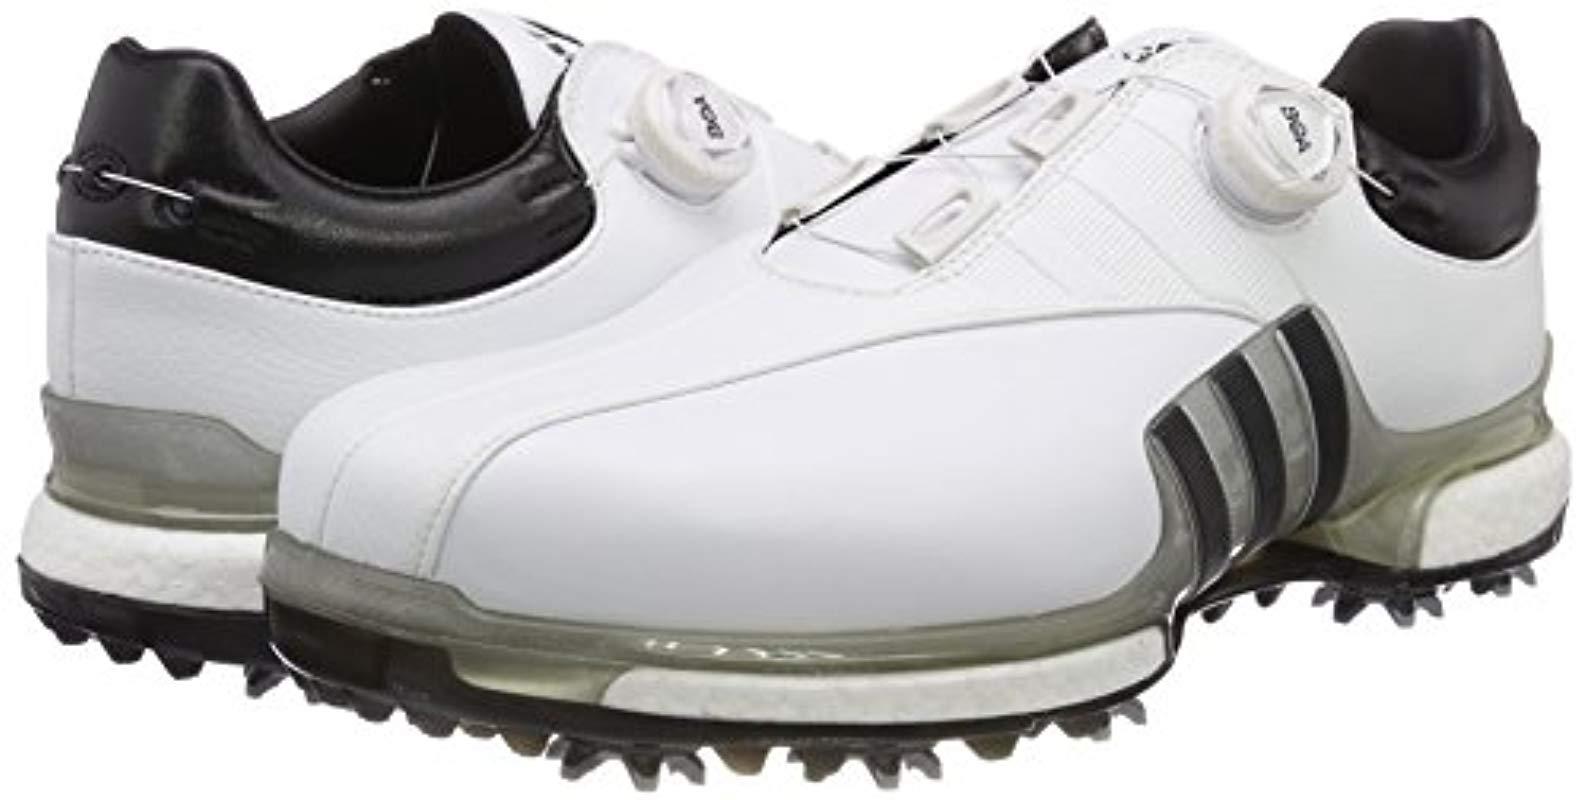 adidas Tour360 Eqt Boa Golf Shoes in White for Men - Save 32% - Lyst